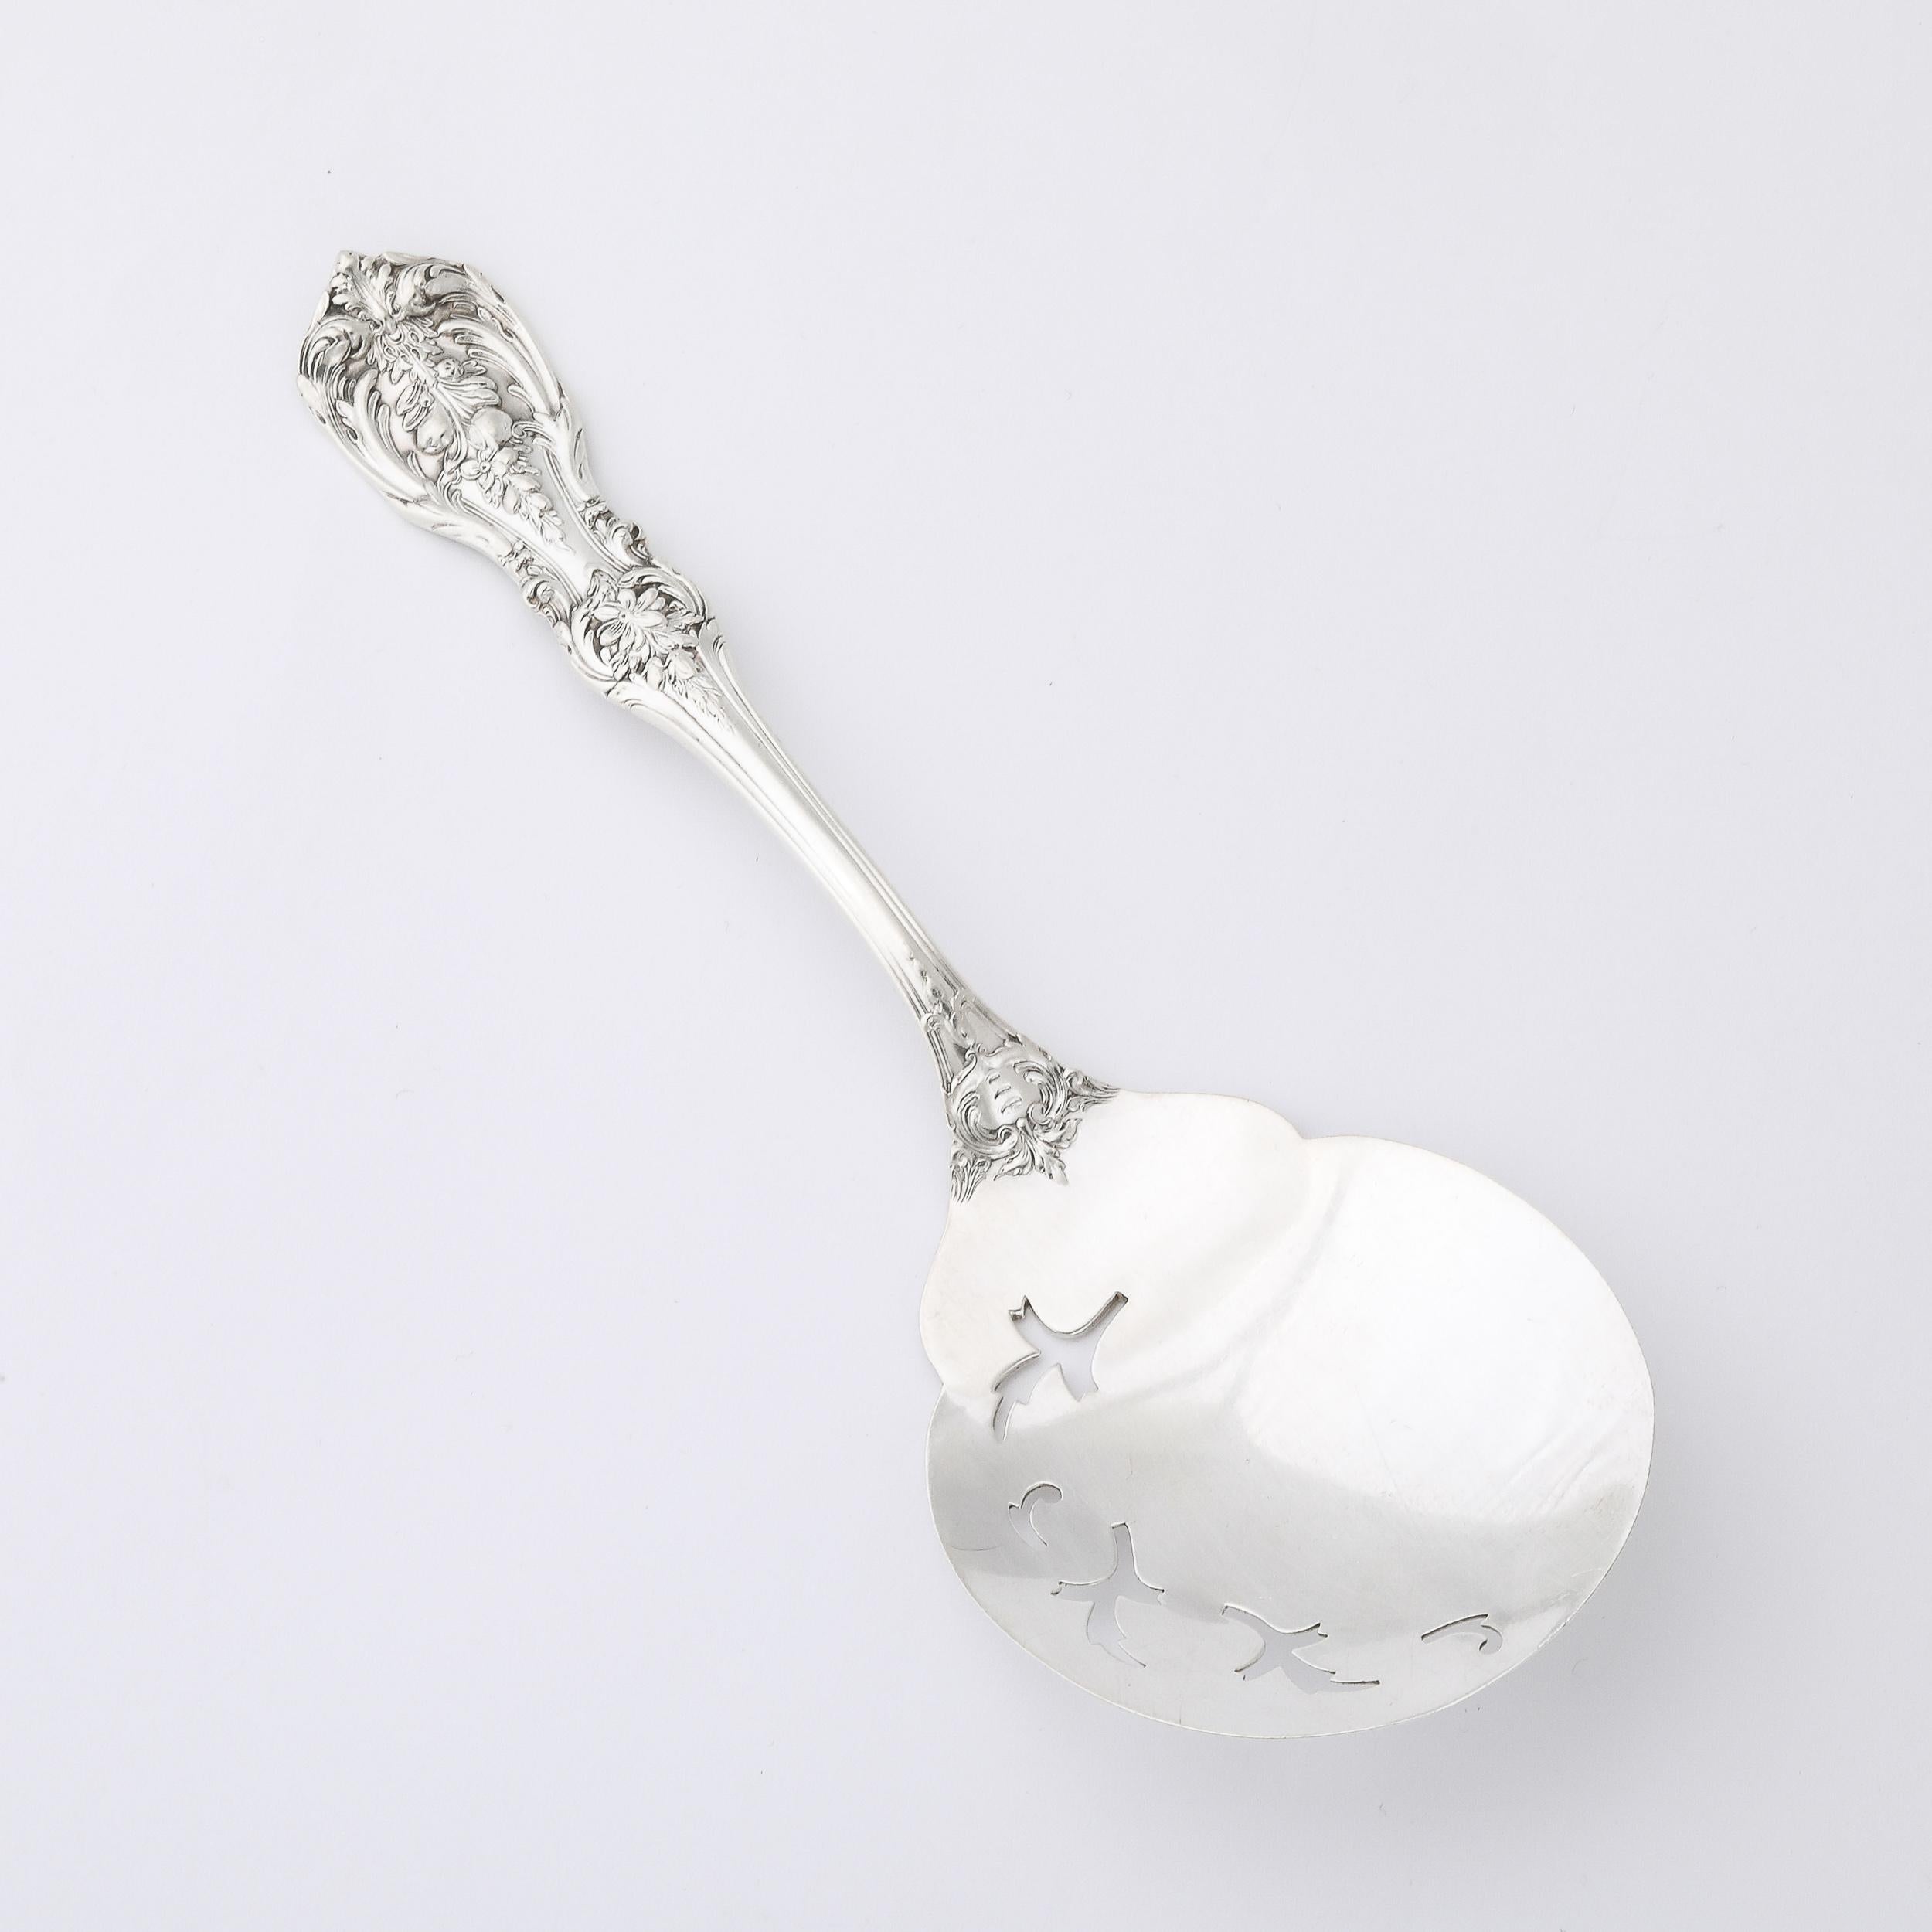 This beautifully detailed and well balanced Reed and Barton Francis I Pattern Sterling Silver Serving Spoon originates from the United States, Circa 1950. Features a lovely profile complimenting one another functionally and visually, this lovely set